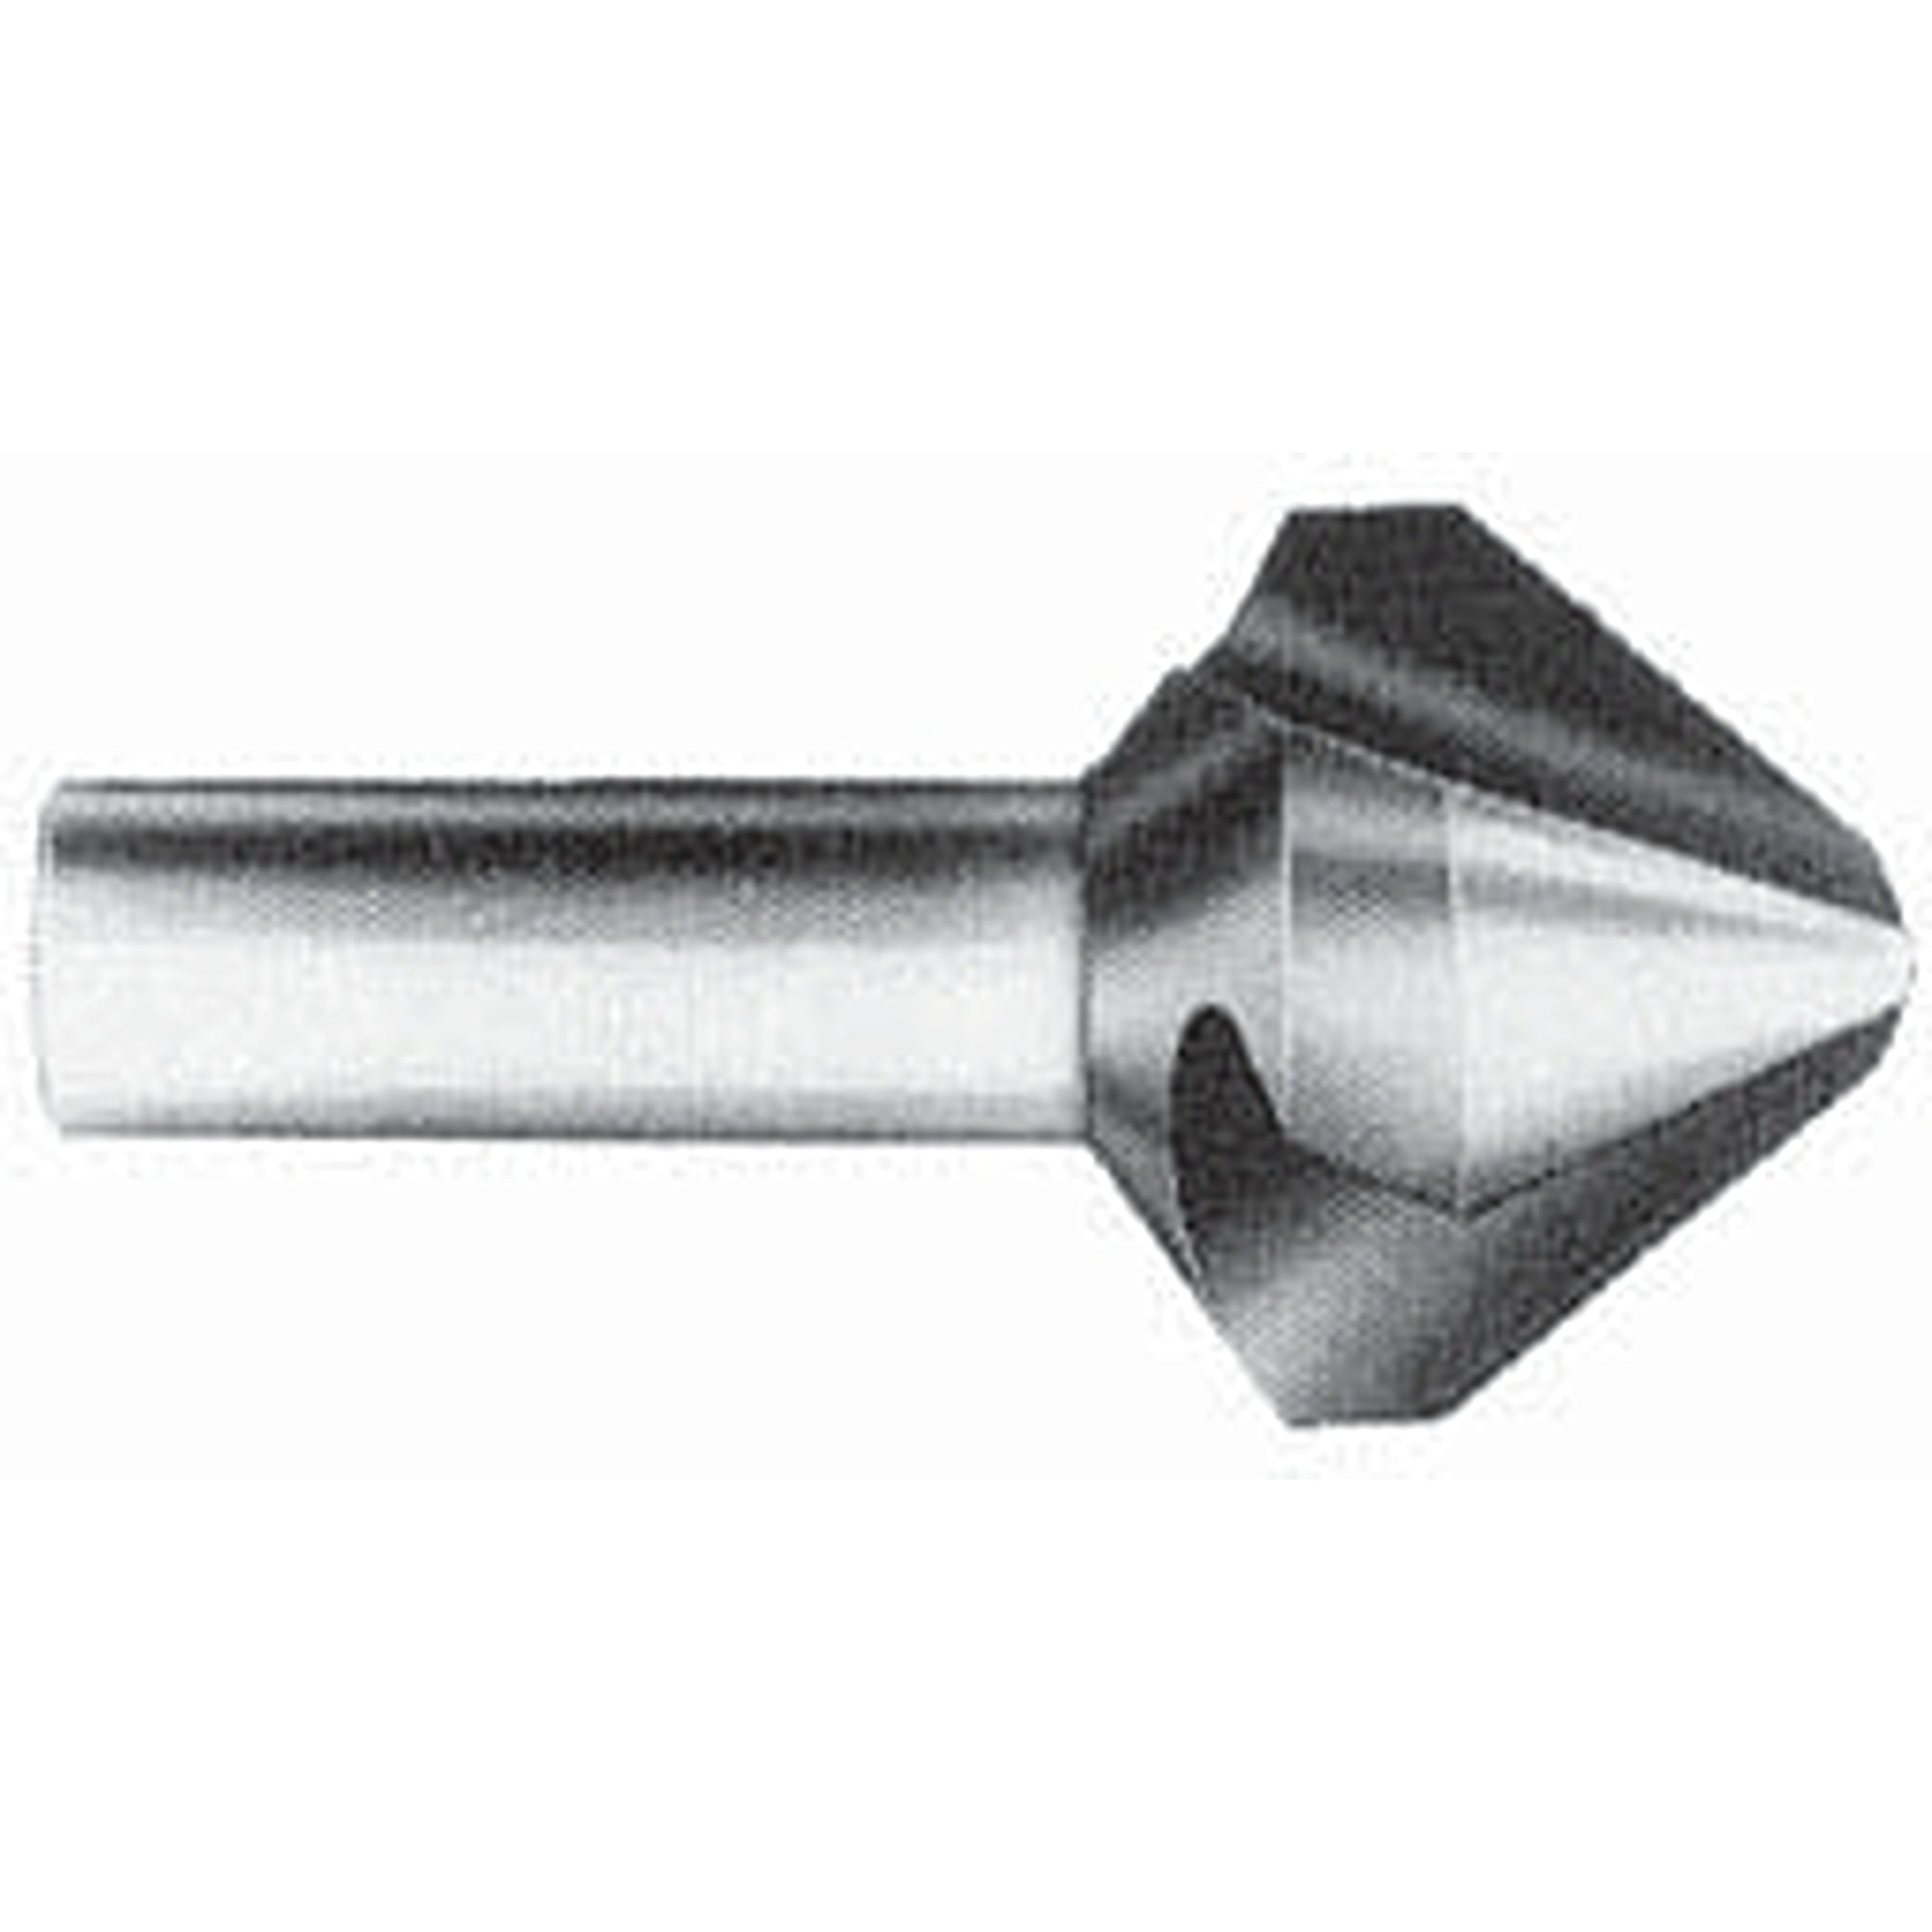 YEW AIK AG02099 H.S.S Straight Shank 3 Flutes Countersink (G100) - Premium H.S.S Straight Shank 3 Flutes Countersink from YEW AIK - Shop now at Yew Aik.